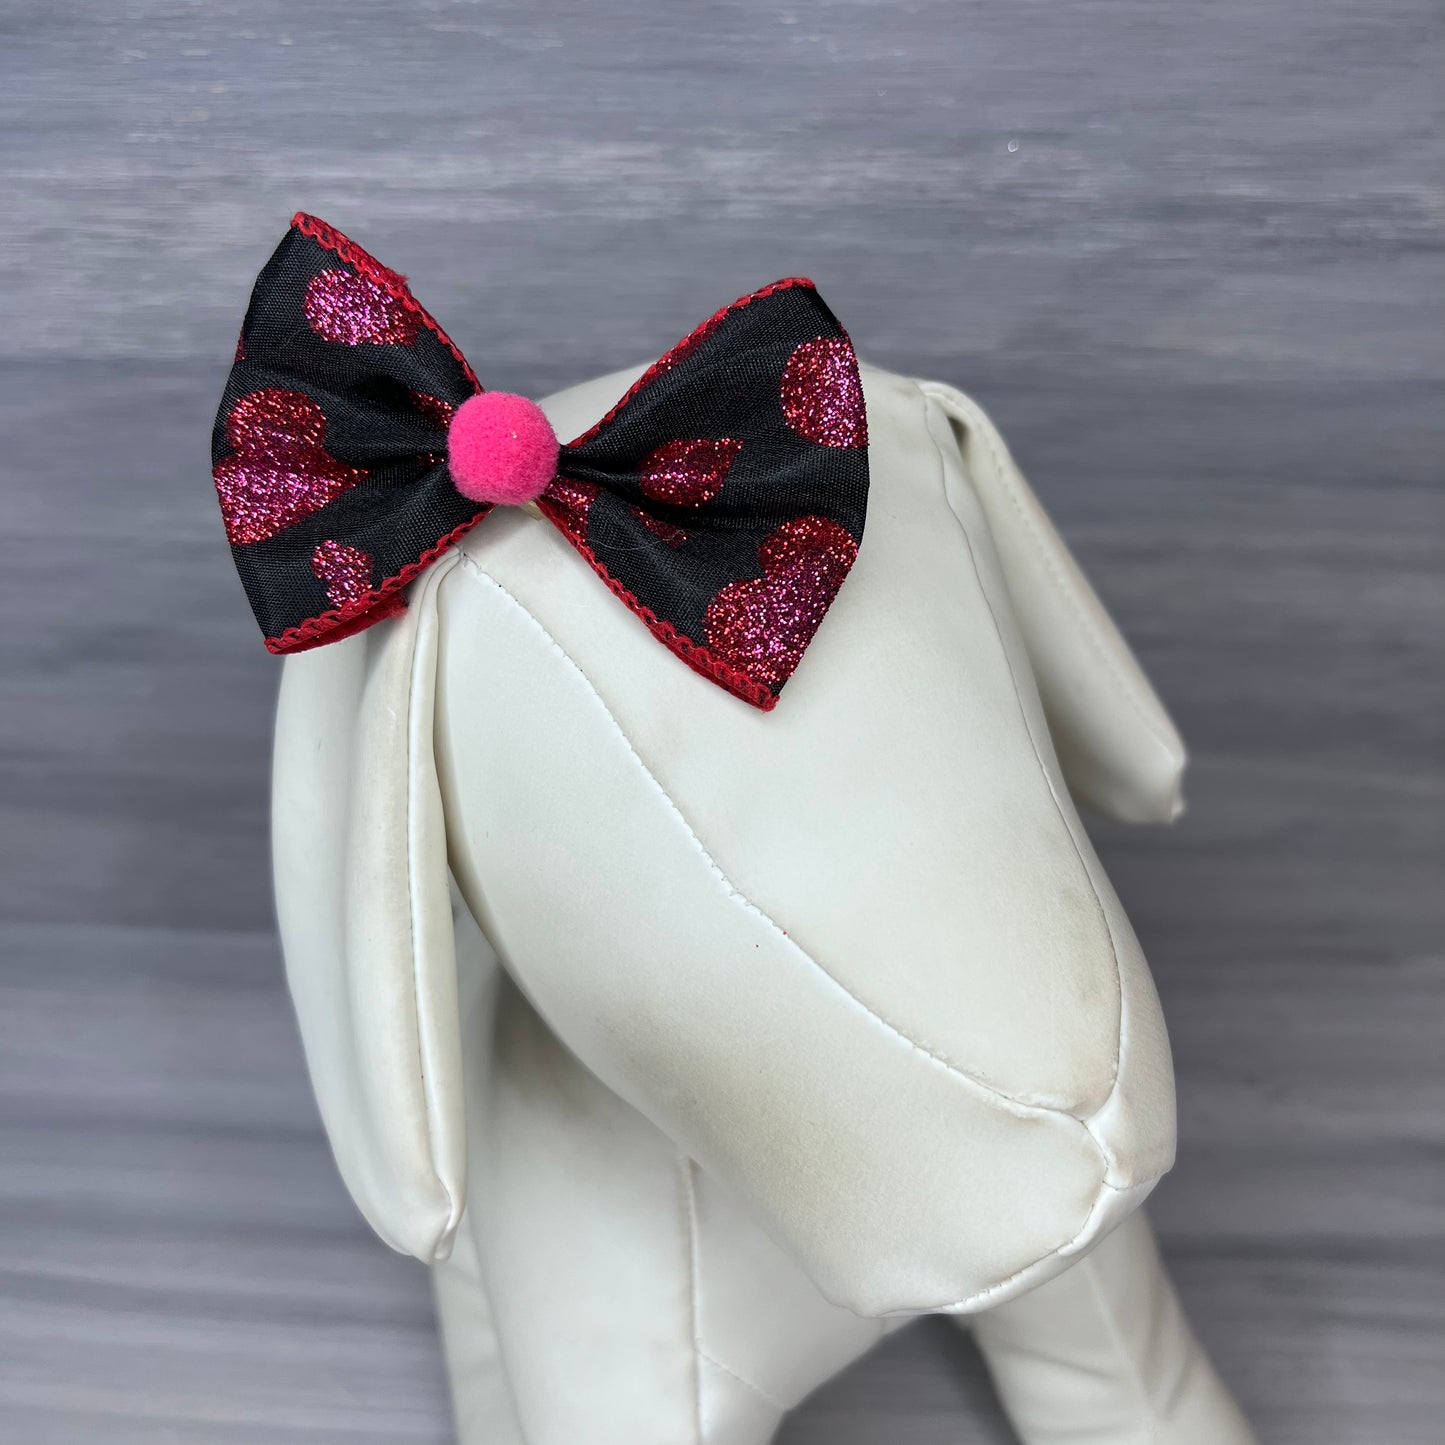 Sassy Valentine - Over the Top - 6 Large Bows